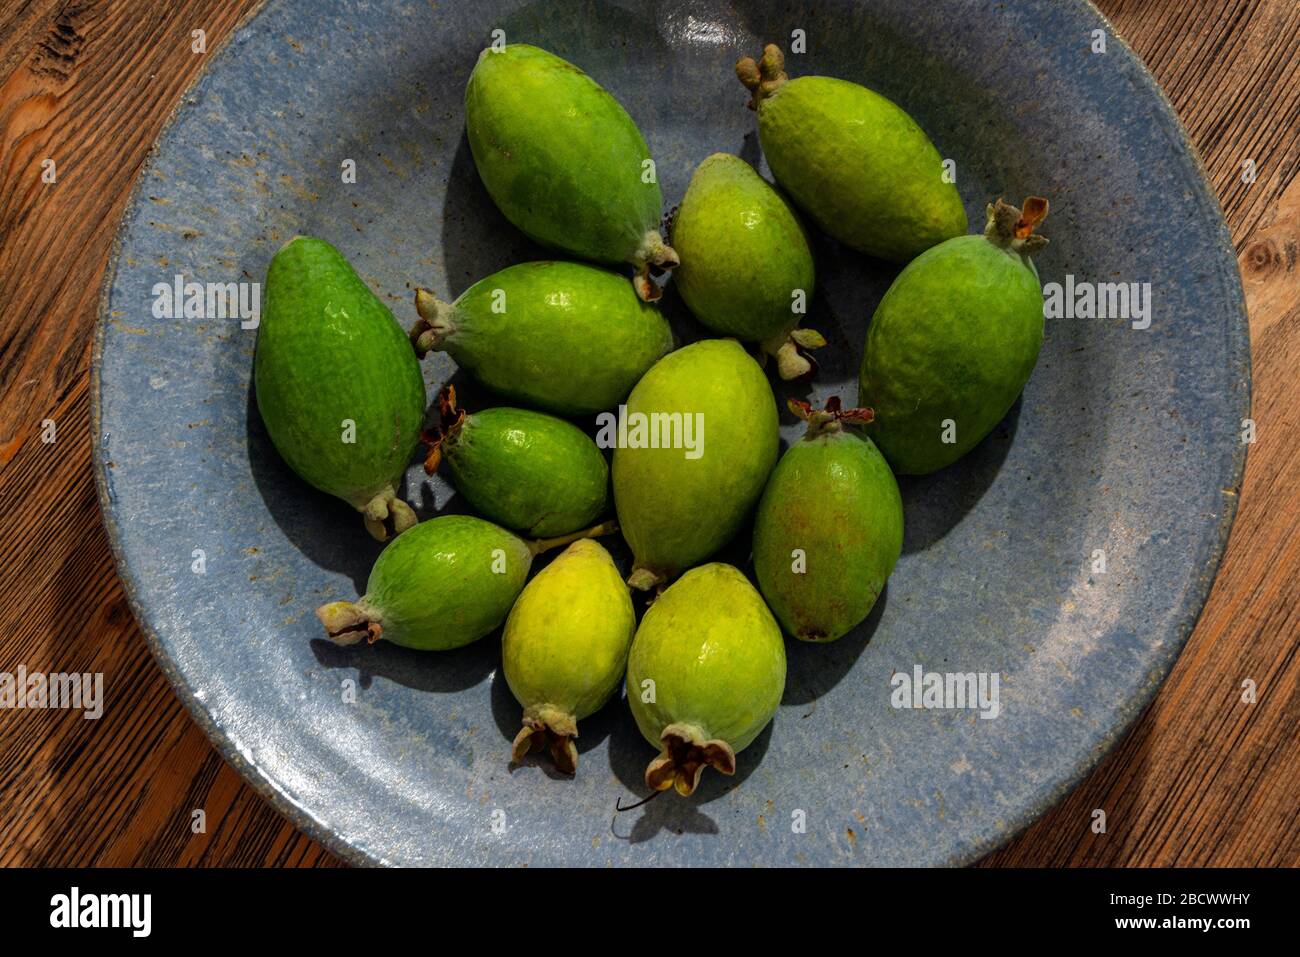 A birds eye view of a plate of green New Zealand Fiejoa tropical exotic fruit. Stock Photo